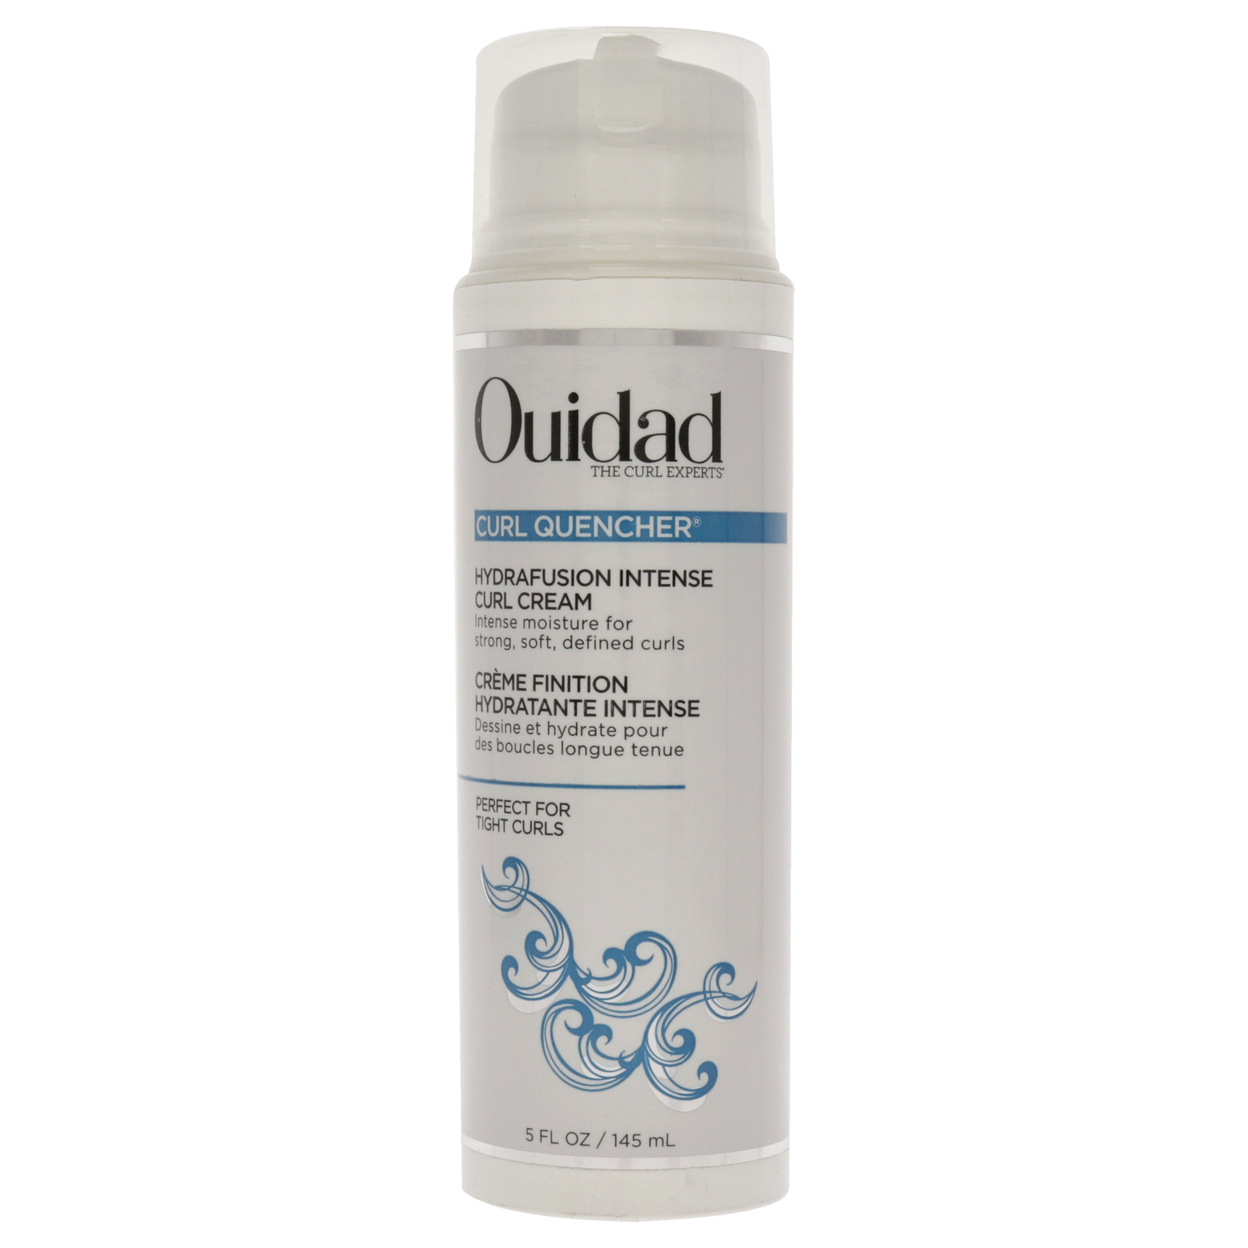 Ouidad Unisex HAIRCARE Curl Quencher Hydrafusion Intense Curl Cream 5 Oz